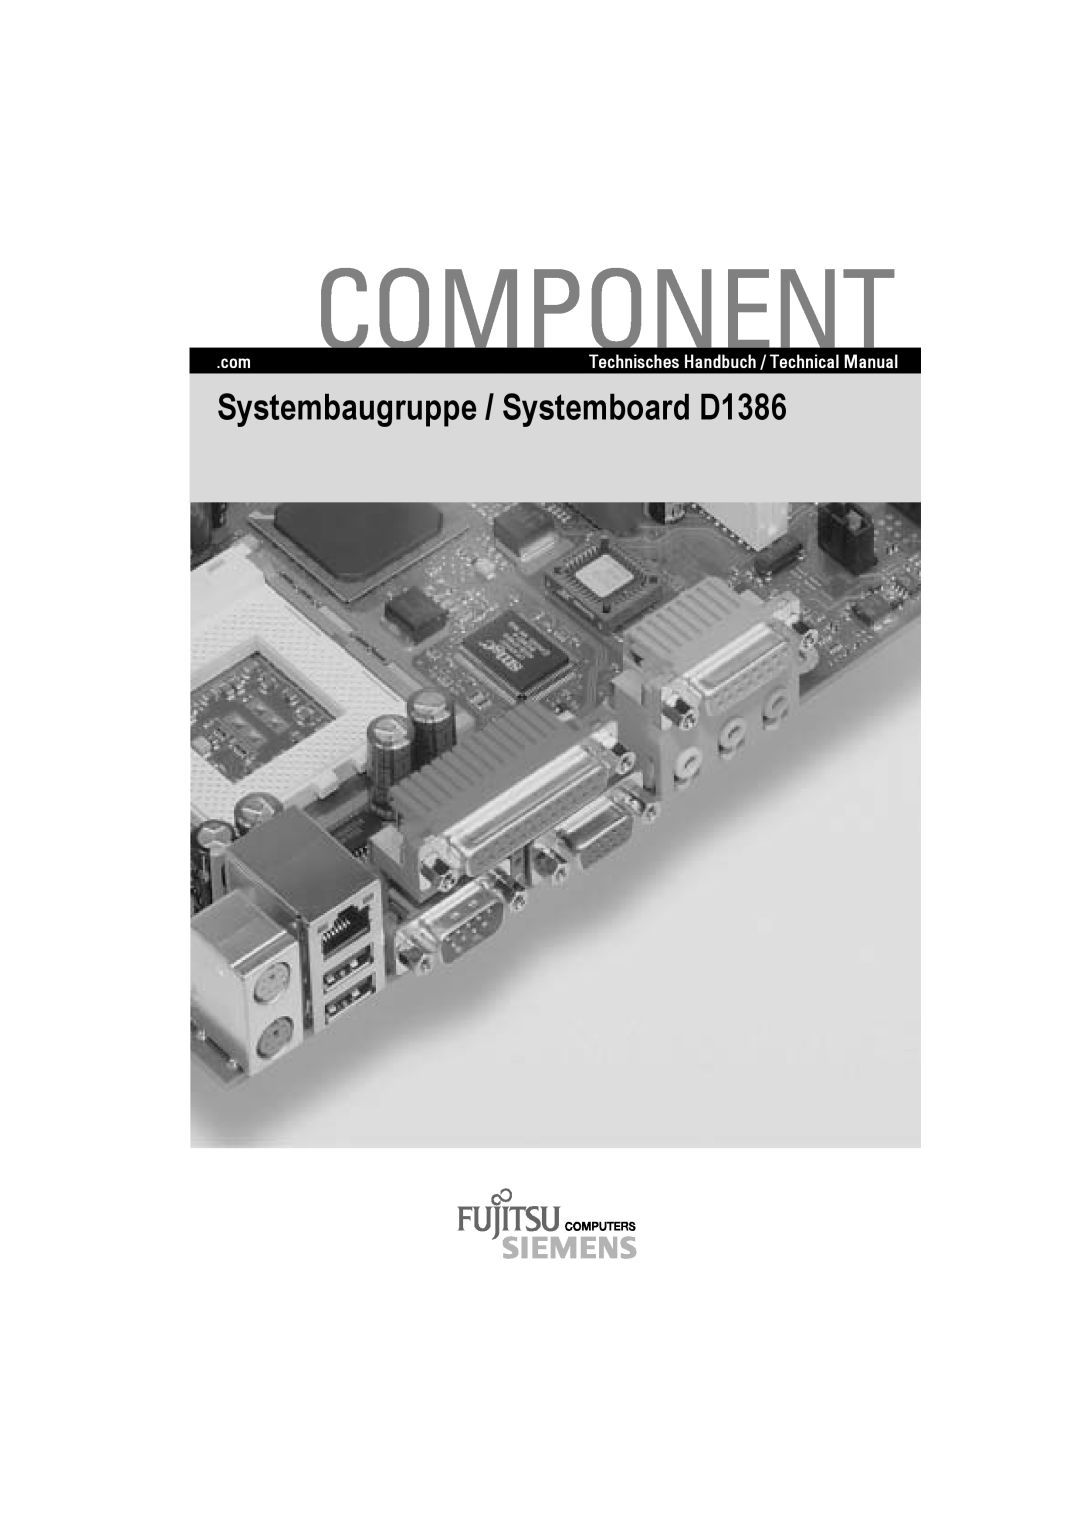 Fujitsu technical manual Component, Systembaugruppe / Systemboard D1386, Technisches Handbuch / Technical Manual 